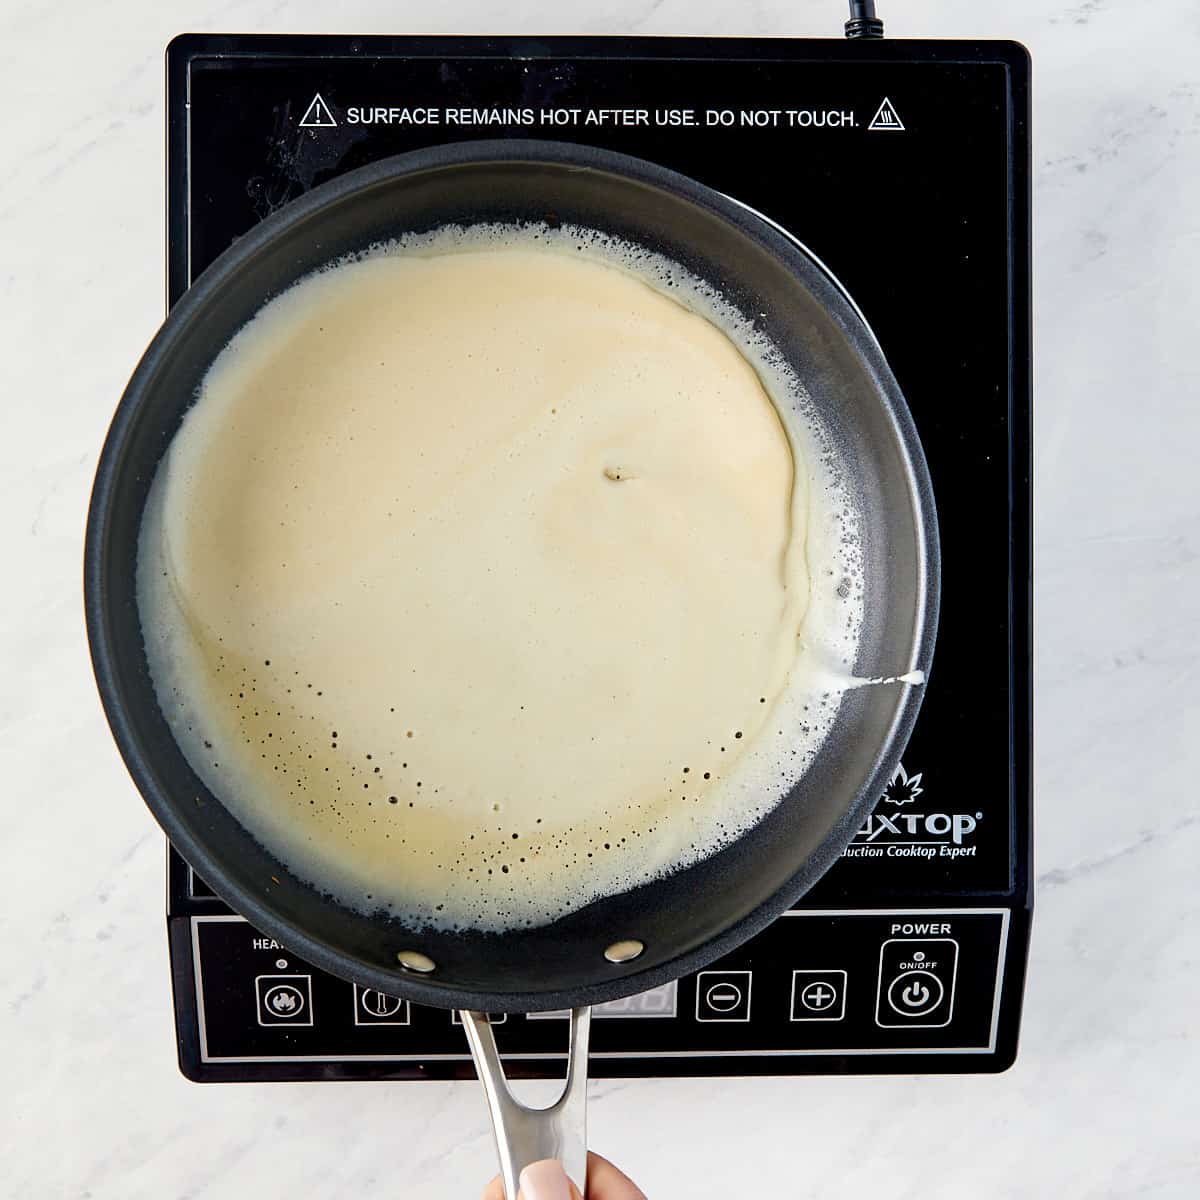 crepe batter being swirled in a pan on a cooktop